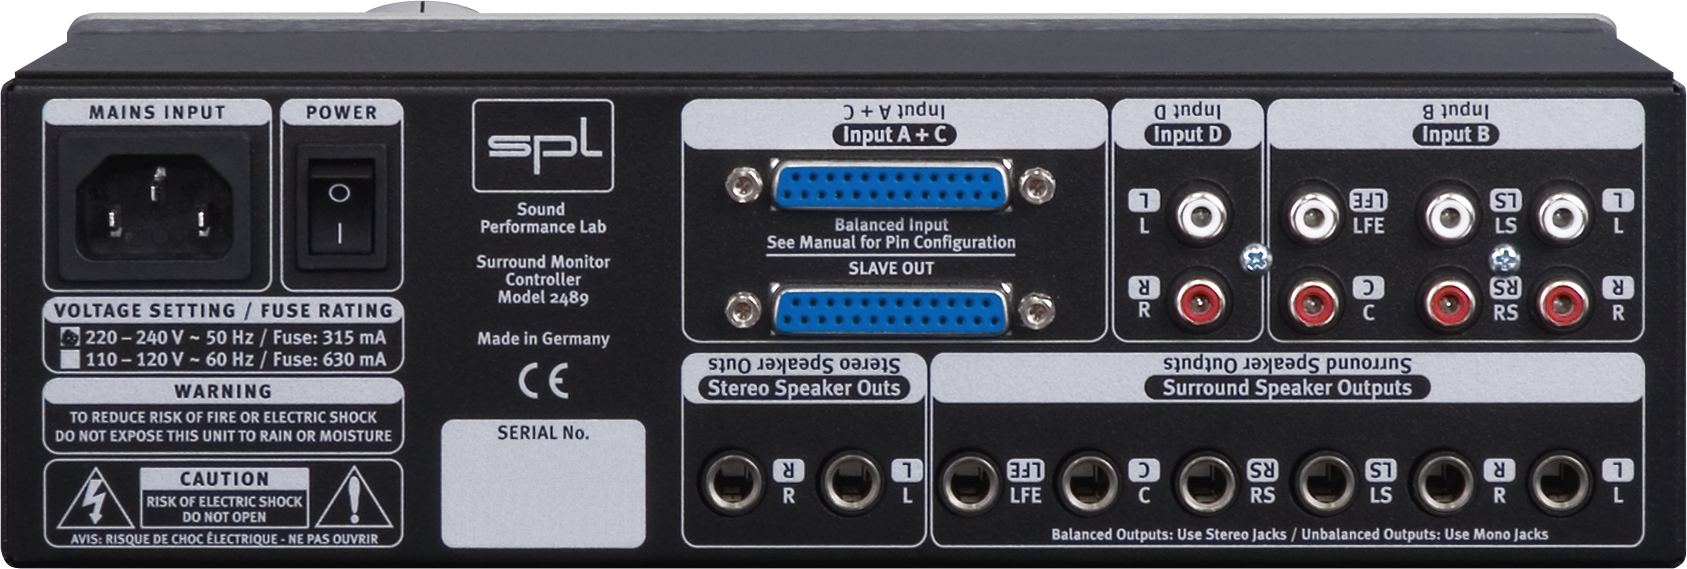 SPL Stereo- and 5.1-Surround Monitor Controller